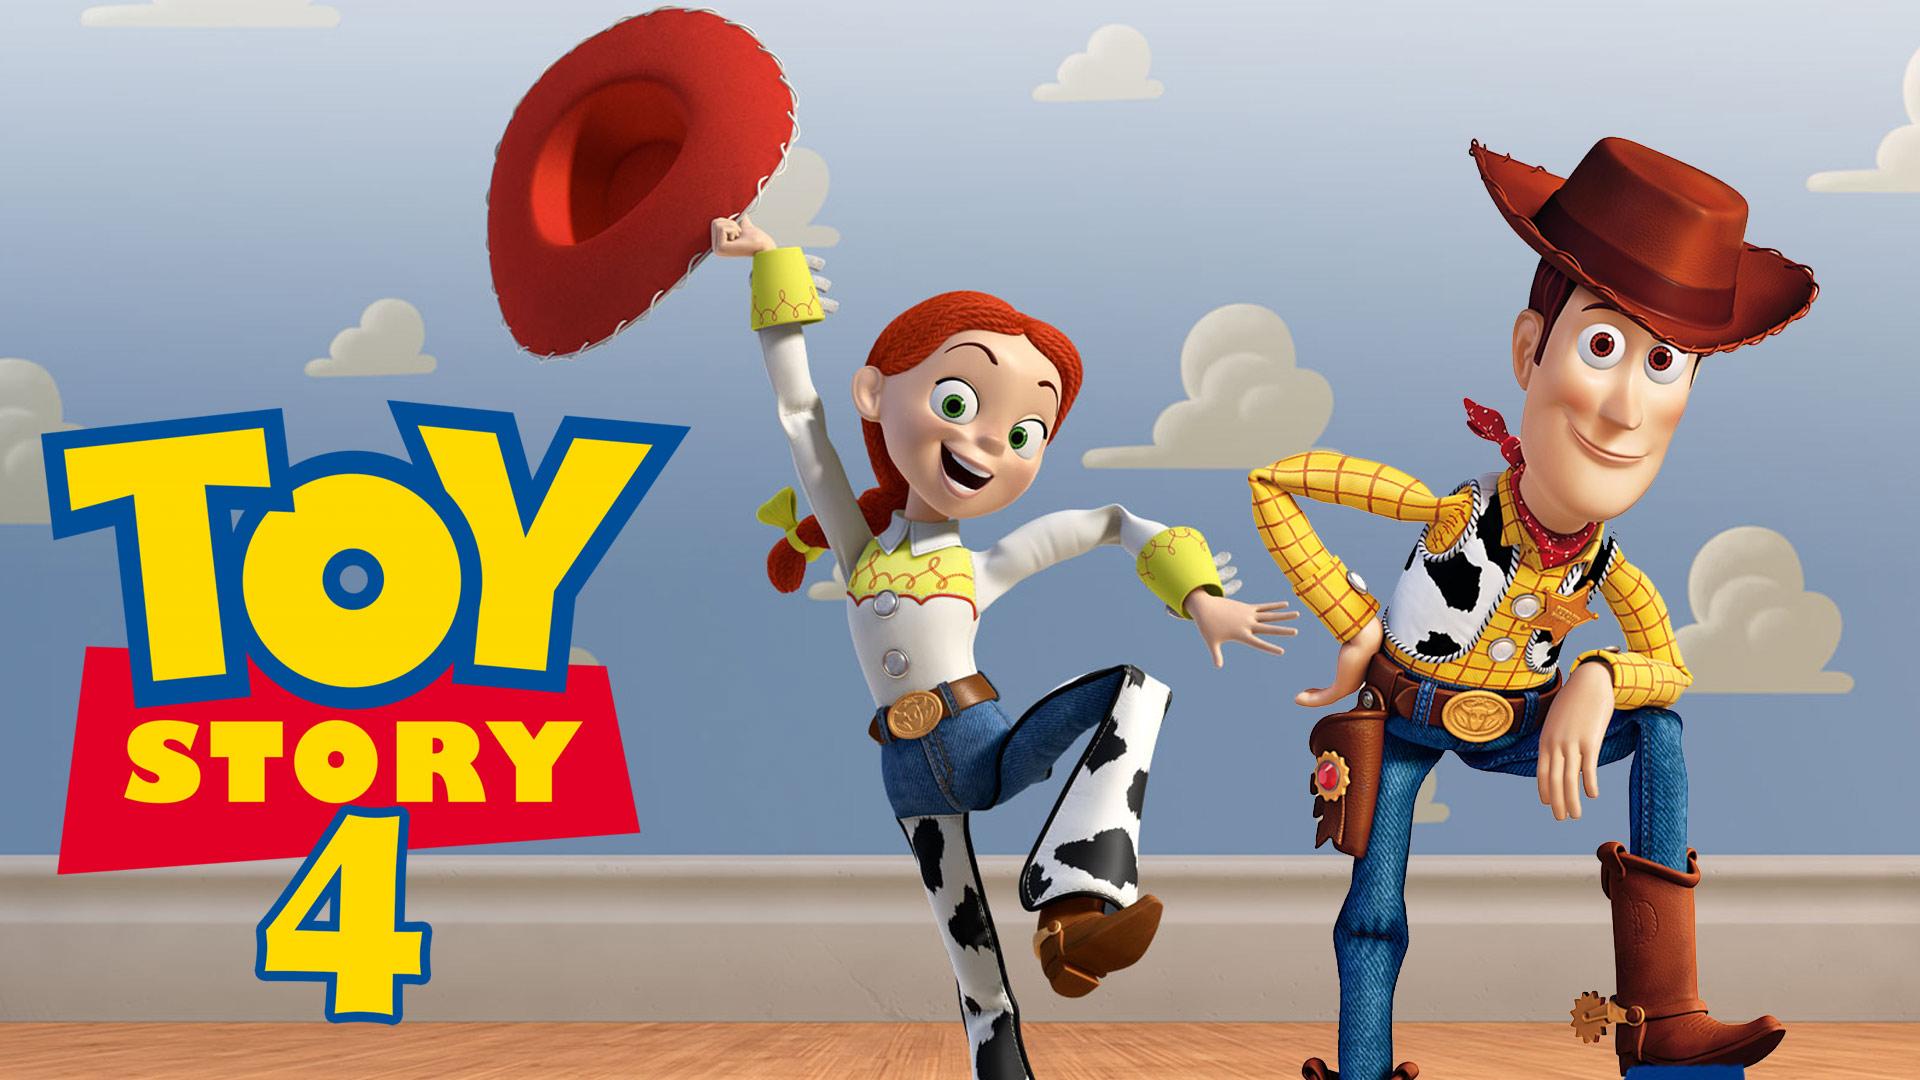 John Lasseter Steps Down From Directing 'Toy Story 4', Josh Cooley